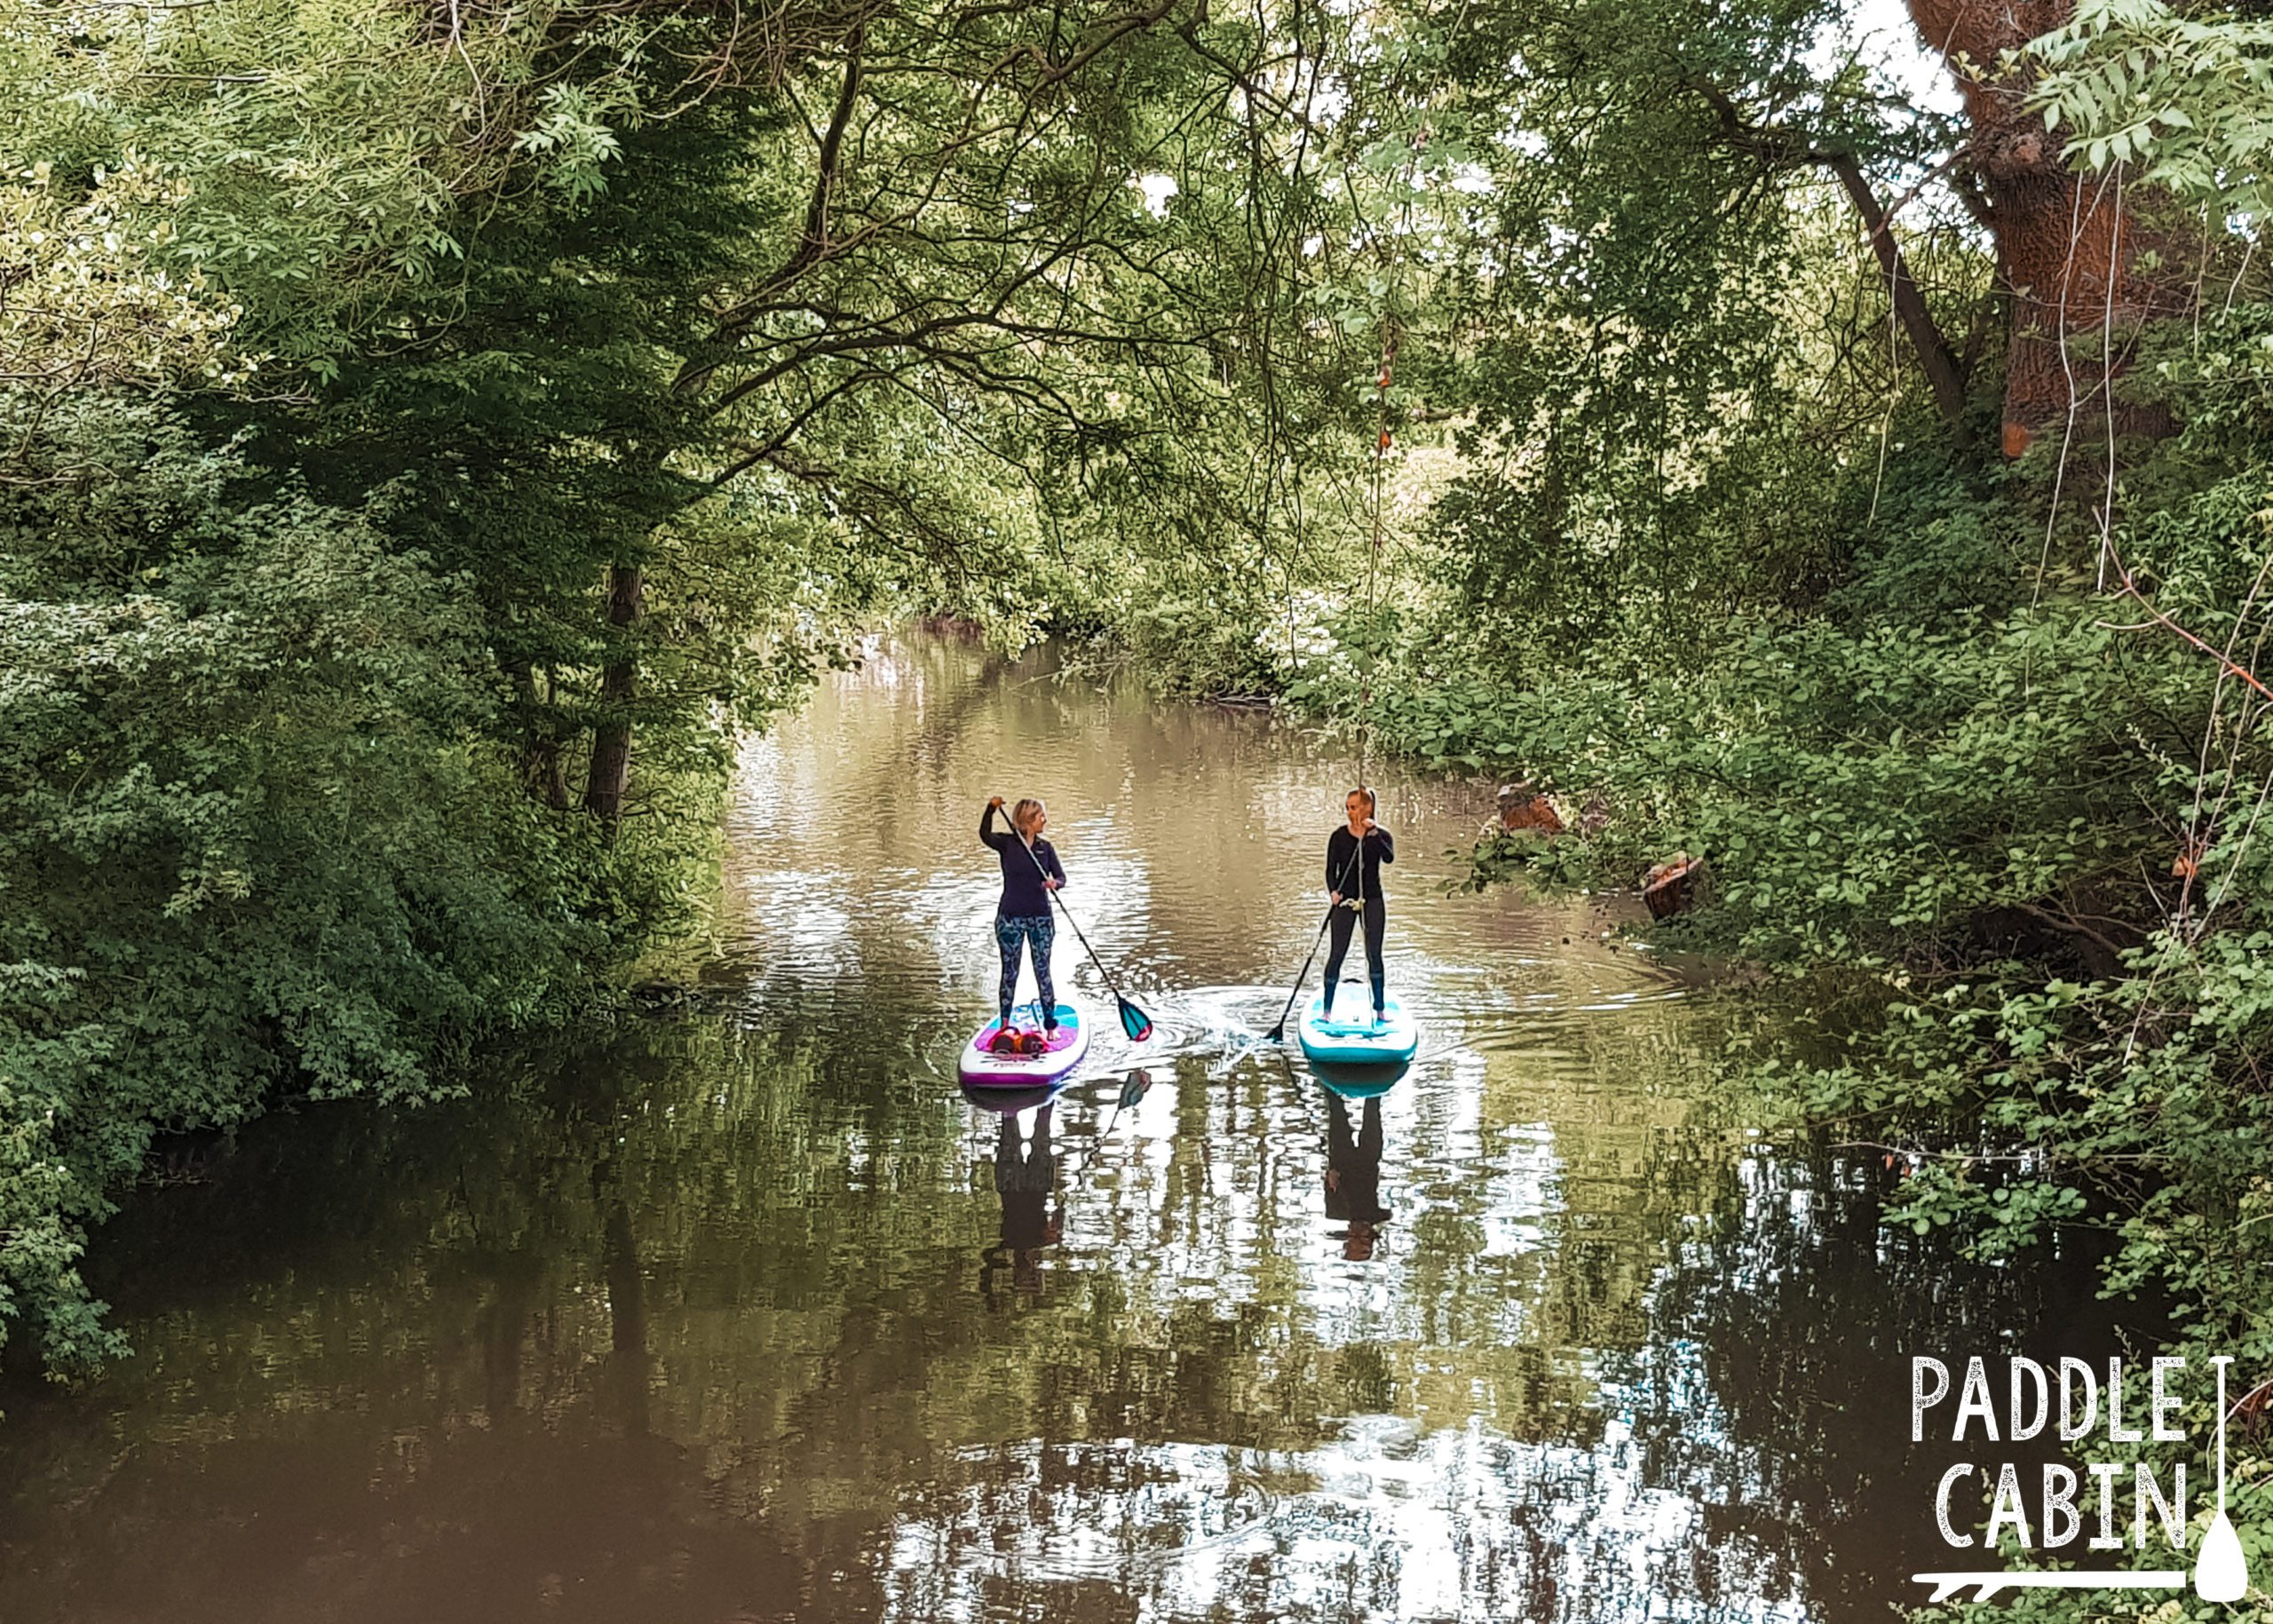 Two women paddle boarding on the river Medway